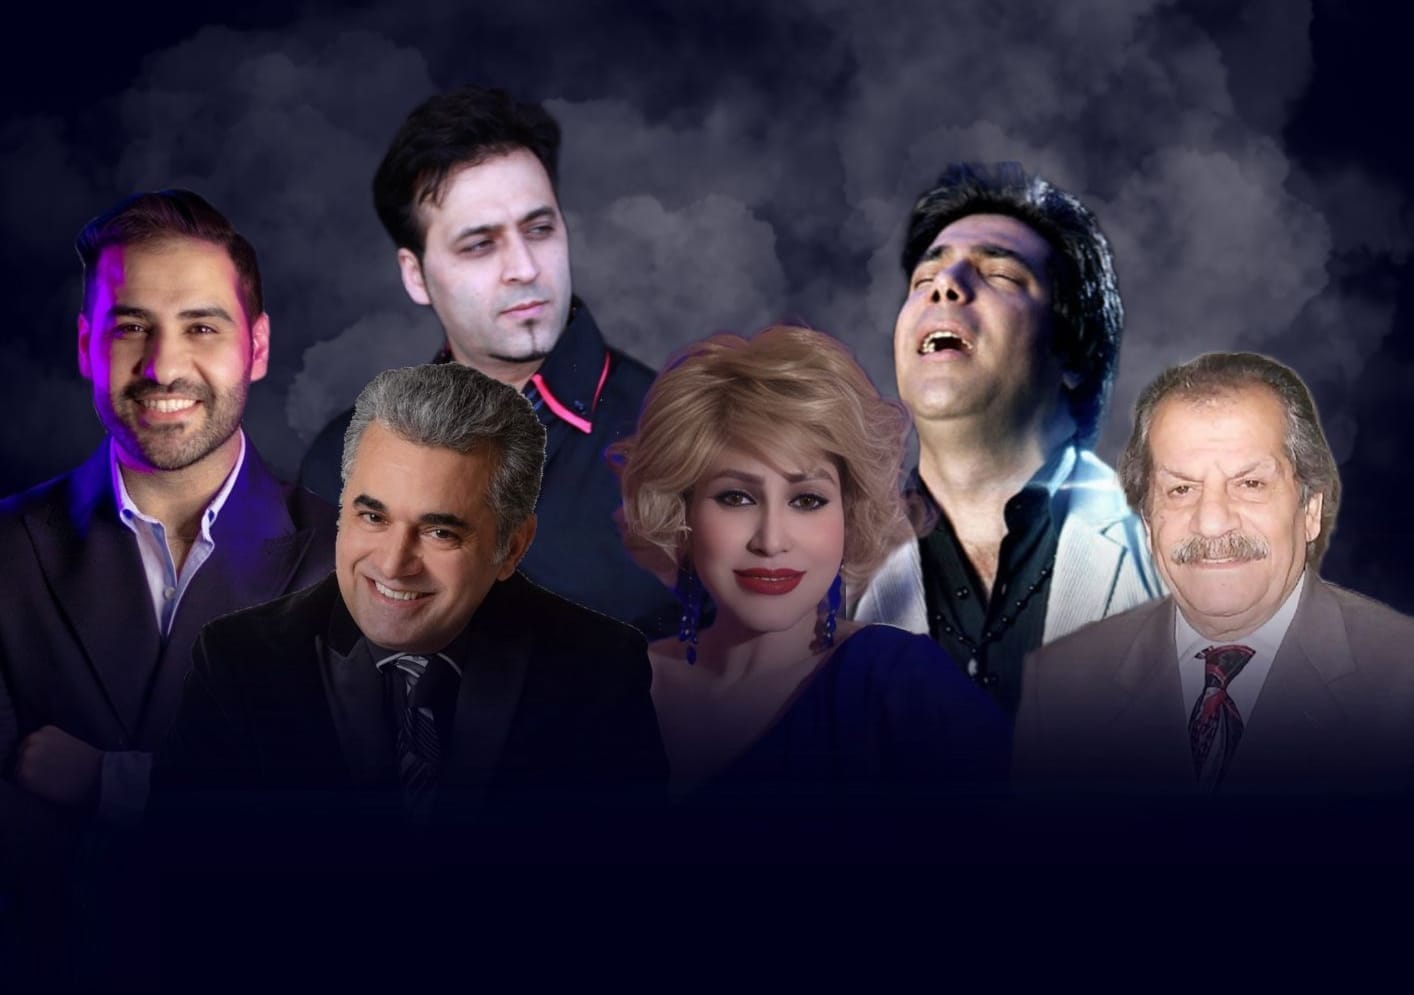 A collage of famous Persian singers. The background is a smoky deep blue sky.